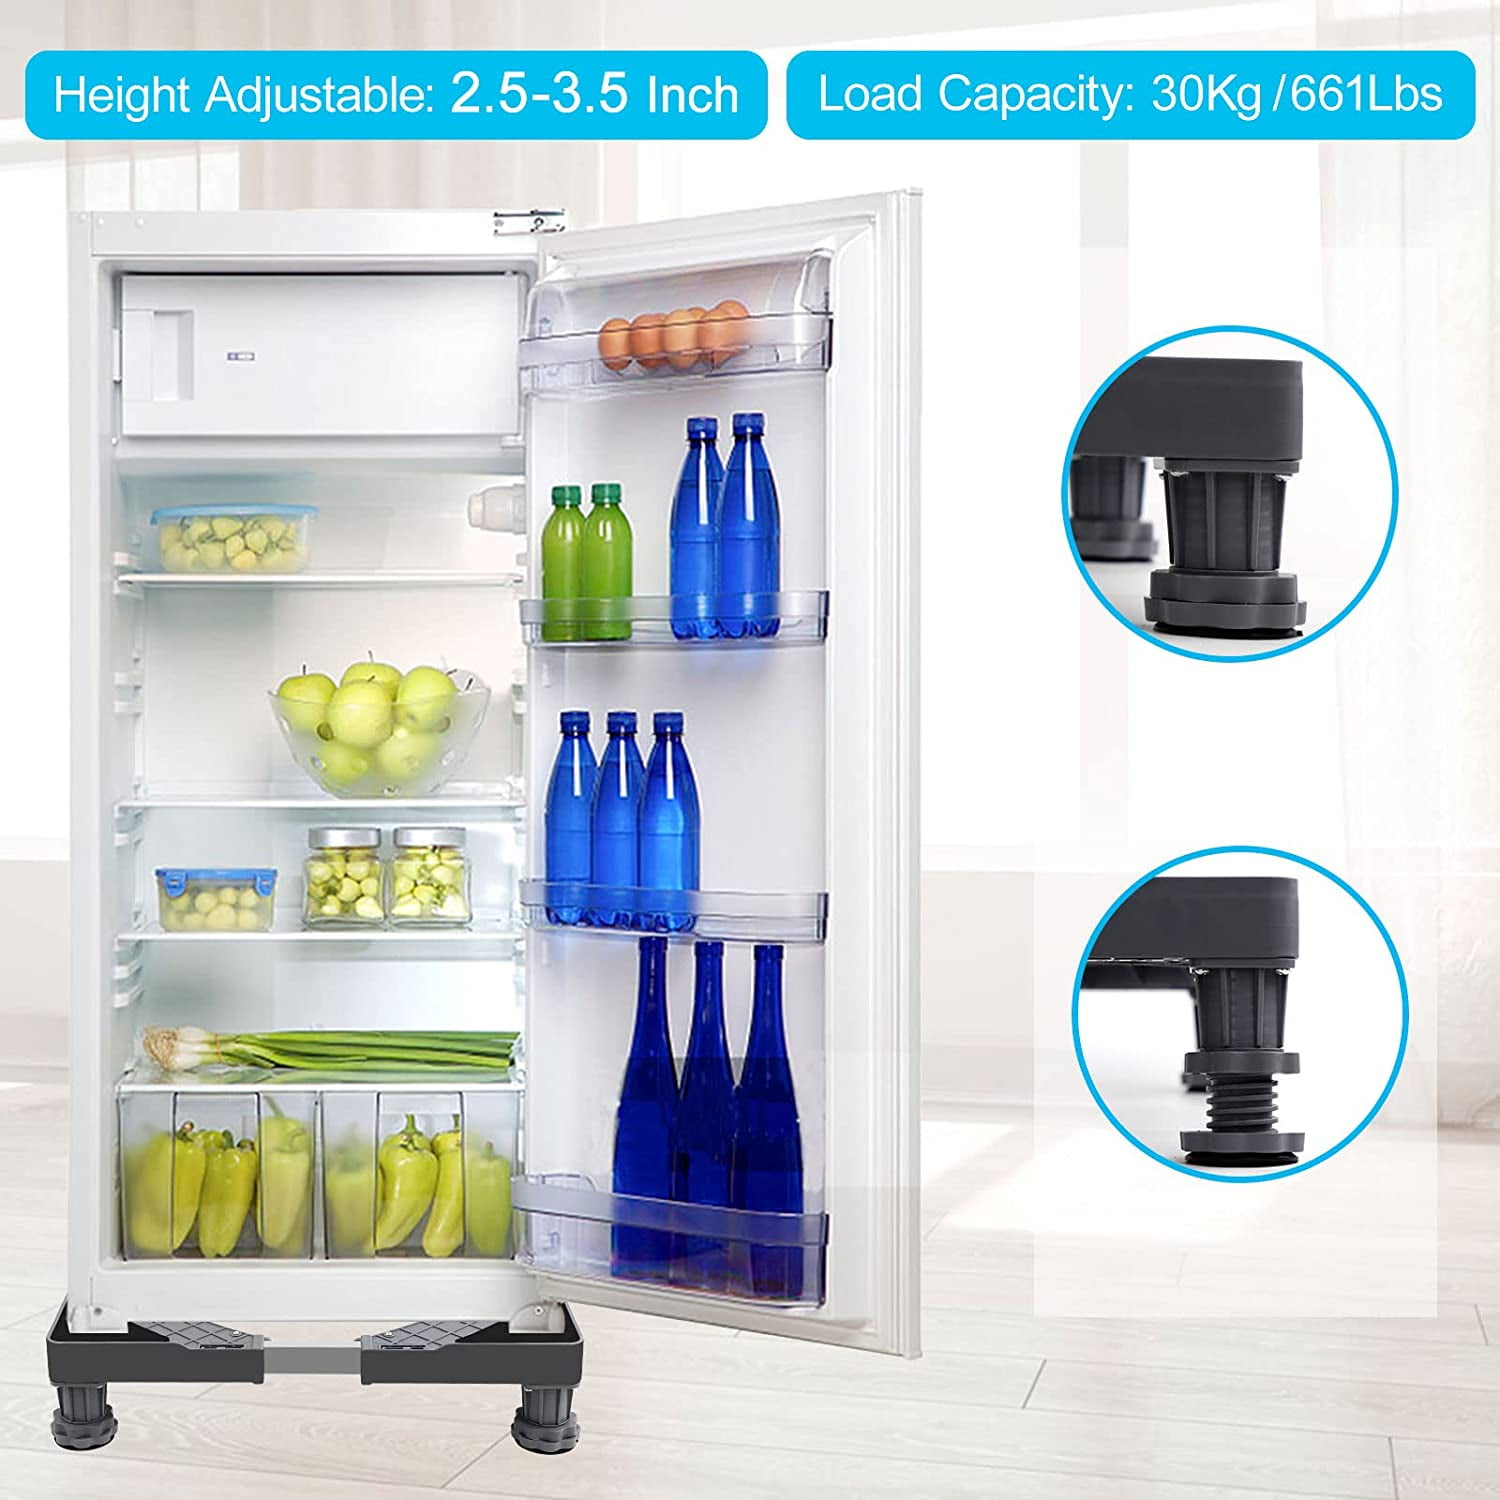  Fridge Stand Easy To Install Dryer Stand Pedestal